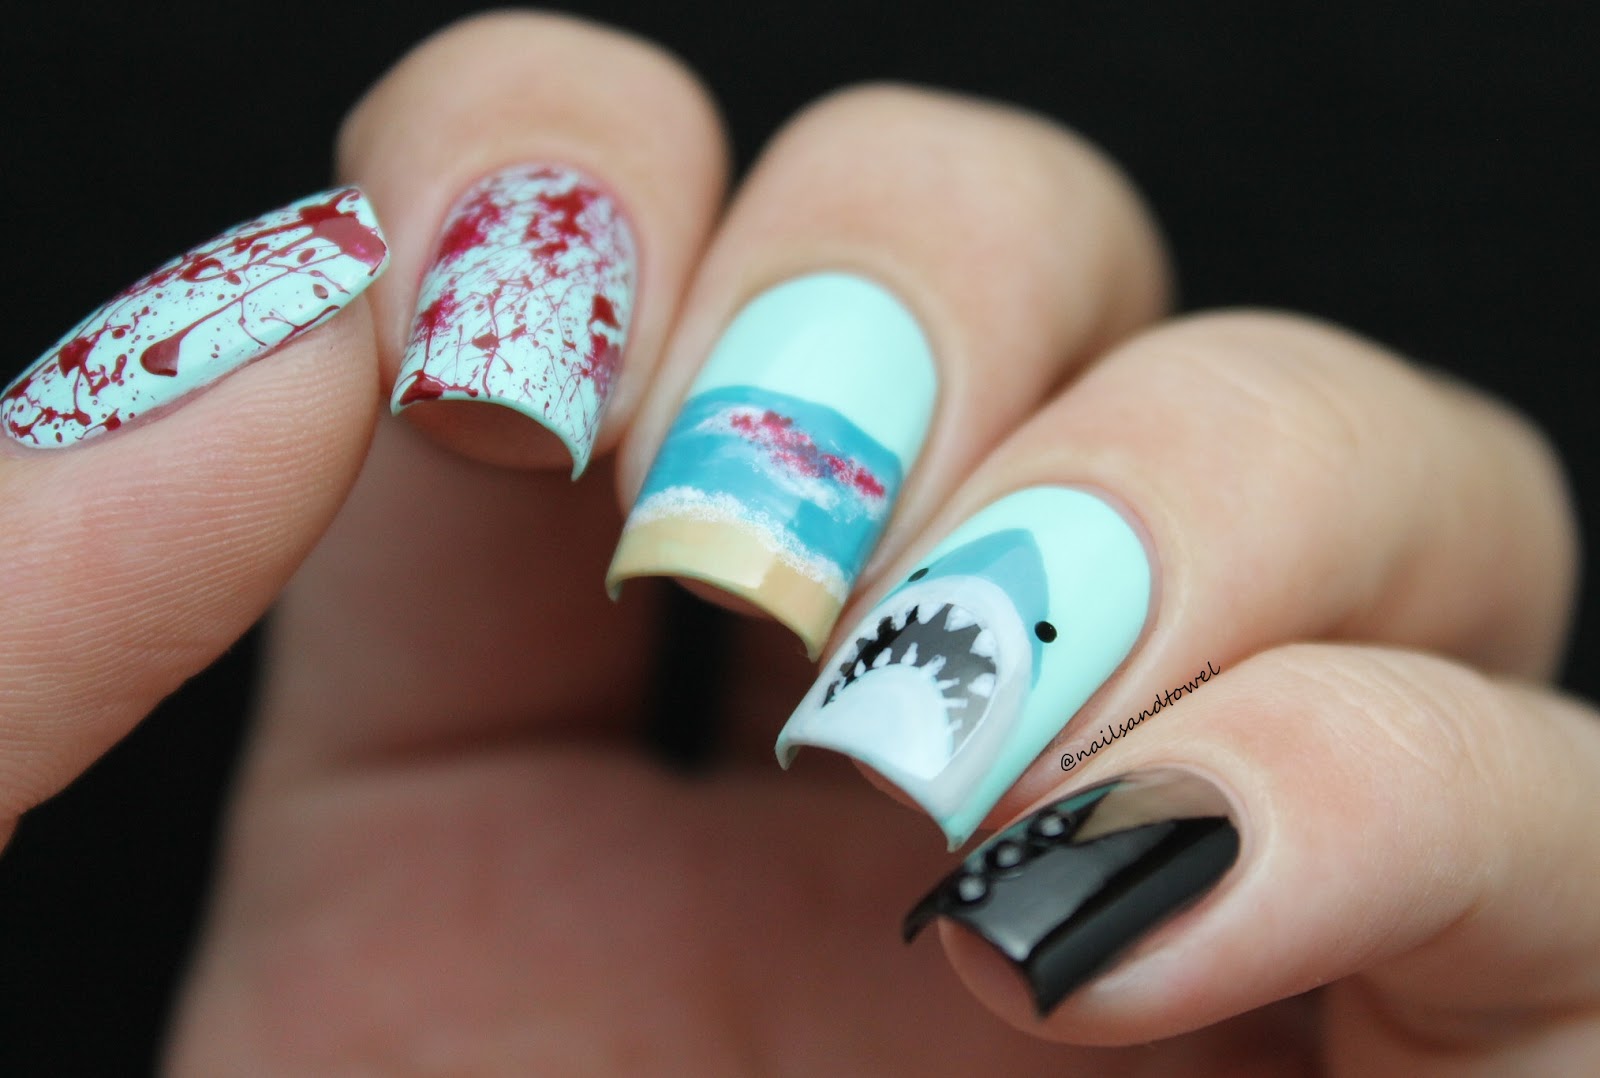 My Nail Art Journal: Shark Nails Inspired By The Movie 